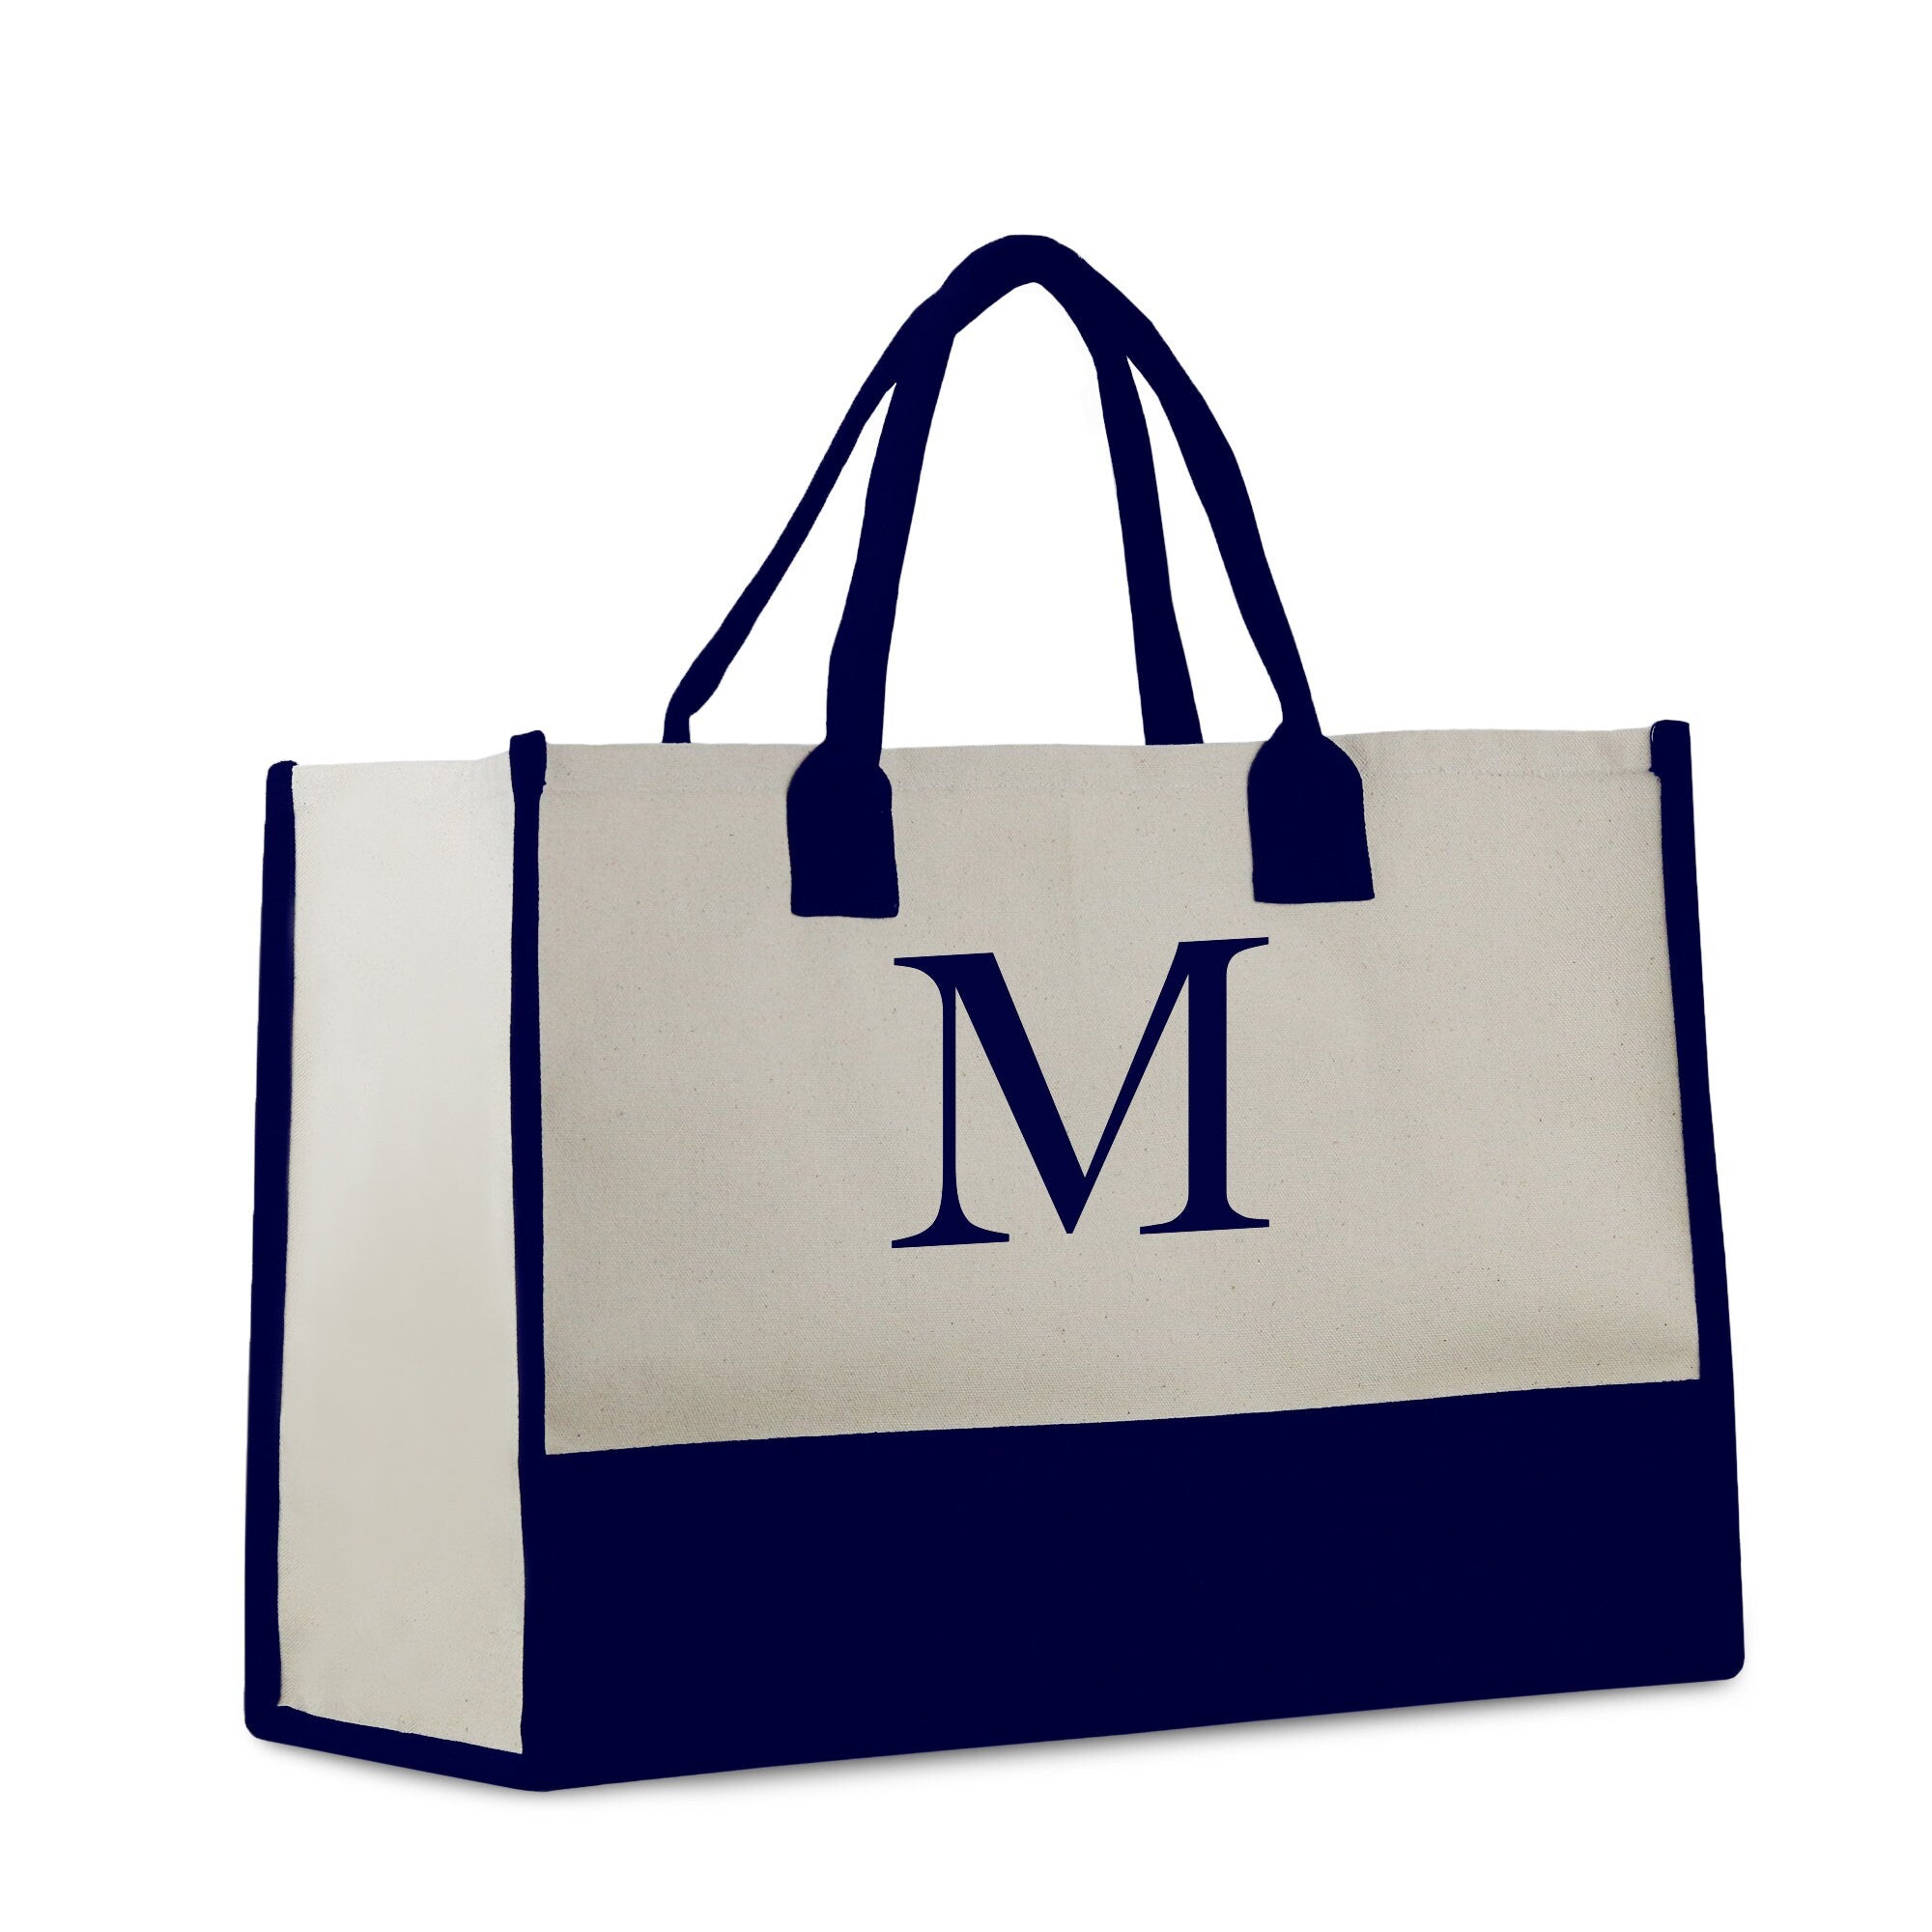 Graduation gift Tote Bags for Women Personalize, Embroidery Initial Monogram Large Bag for Mom, 100% Cotton Canvas, Bridesmaid  Gift Navy